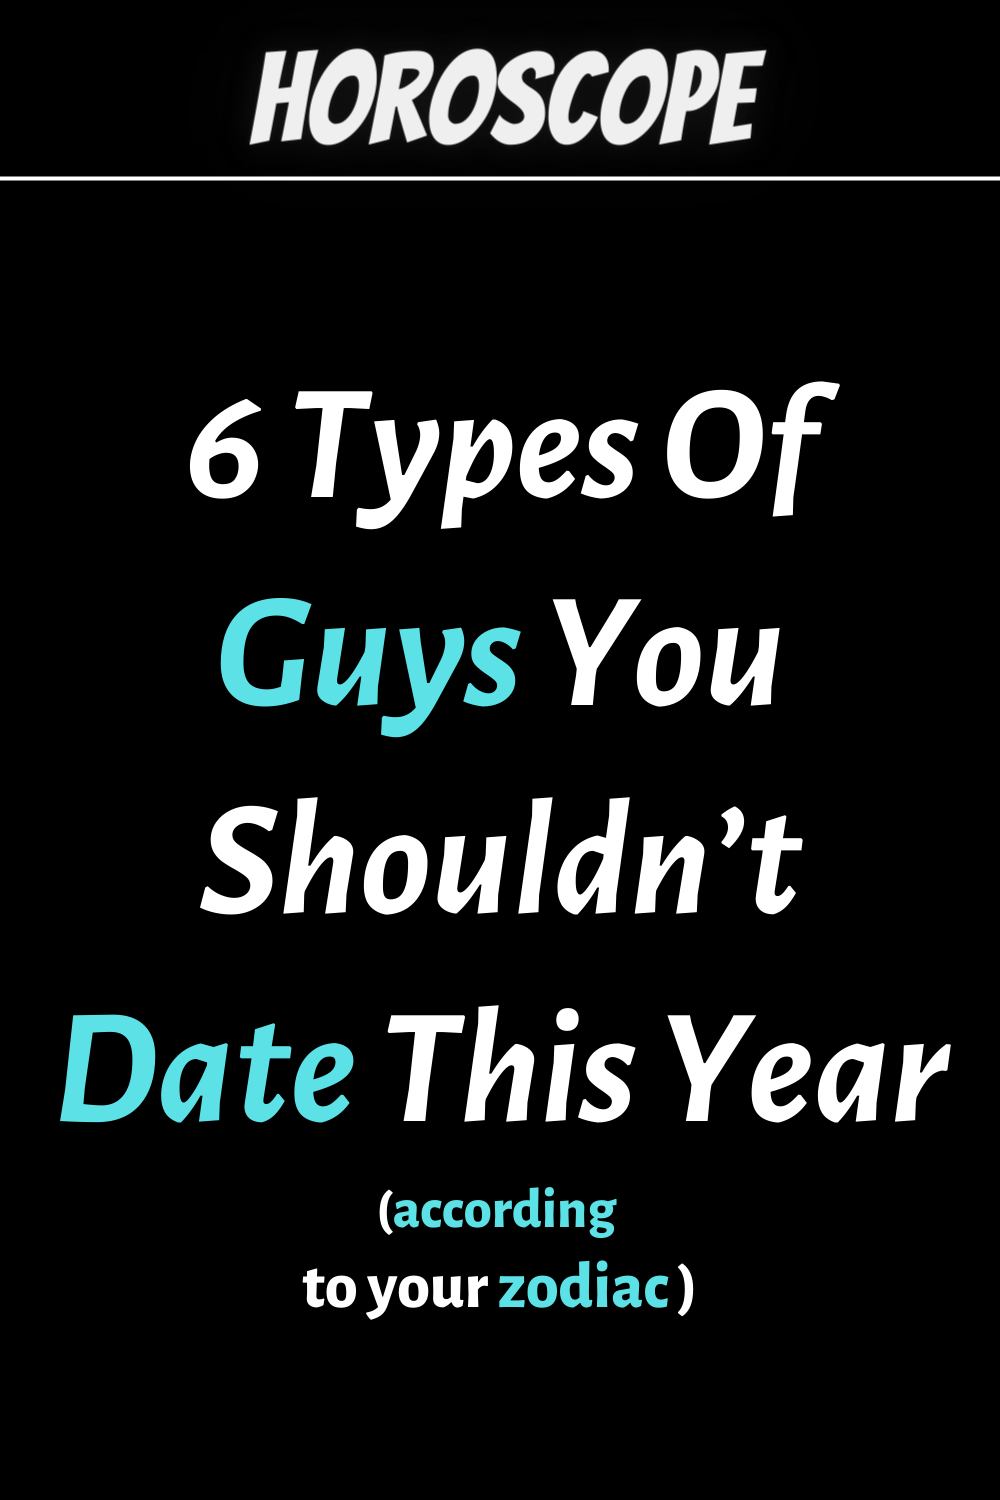 6 Types Of Guys You Shouldn’t Date This Year